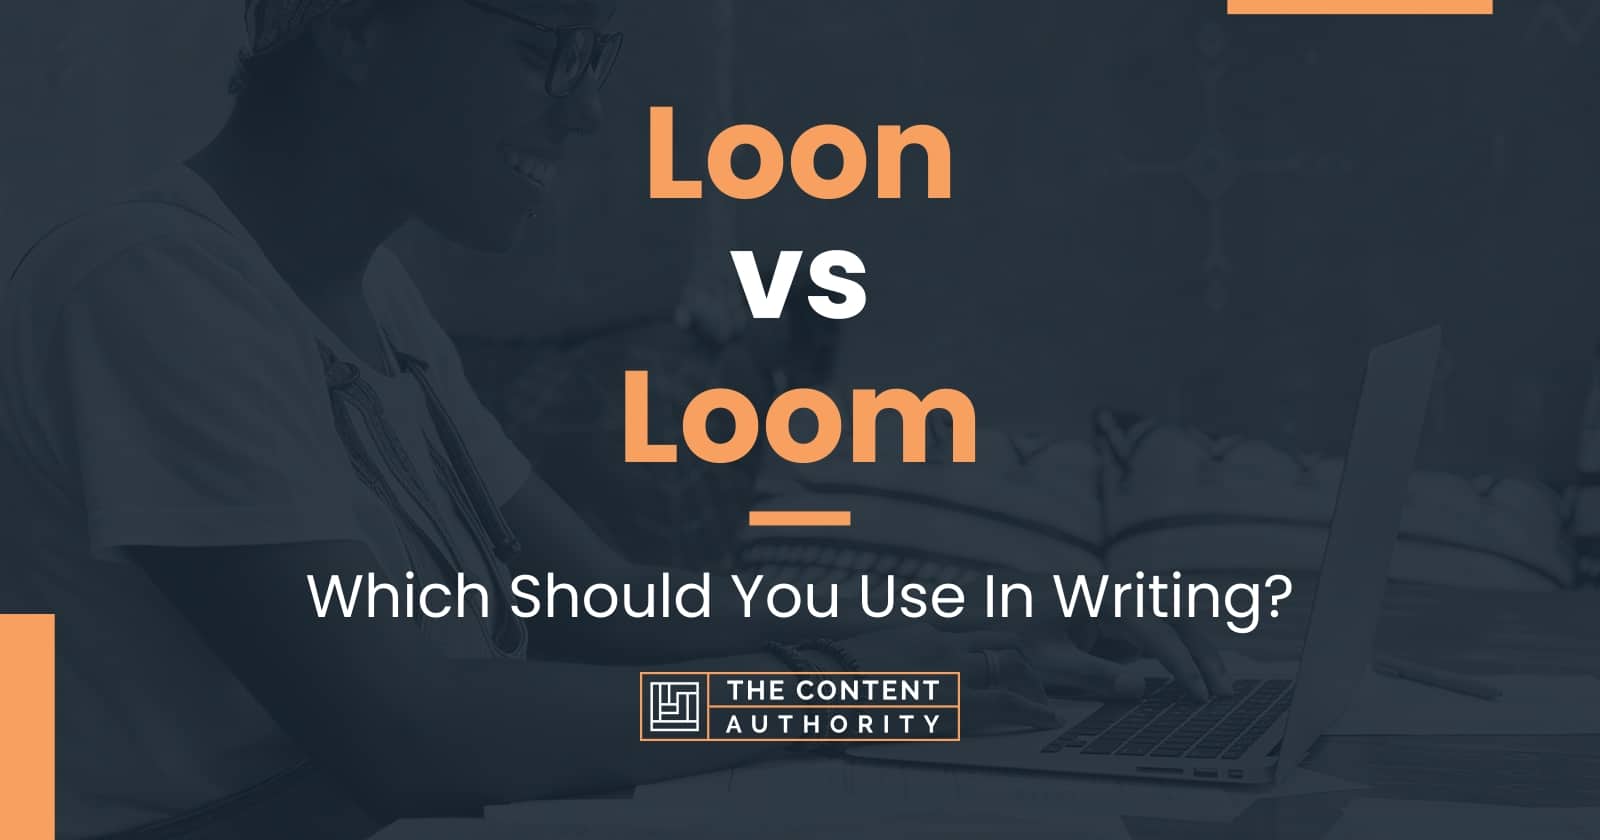 Loon vs Loom: Which Should You Use In Writing?